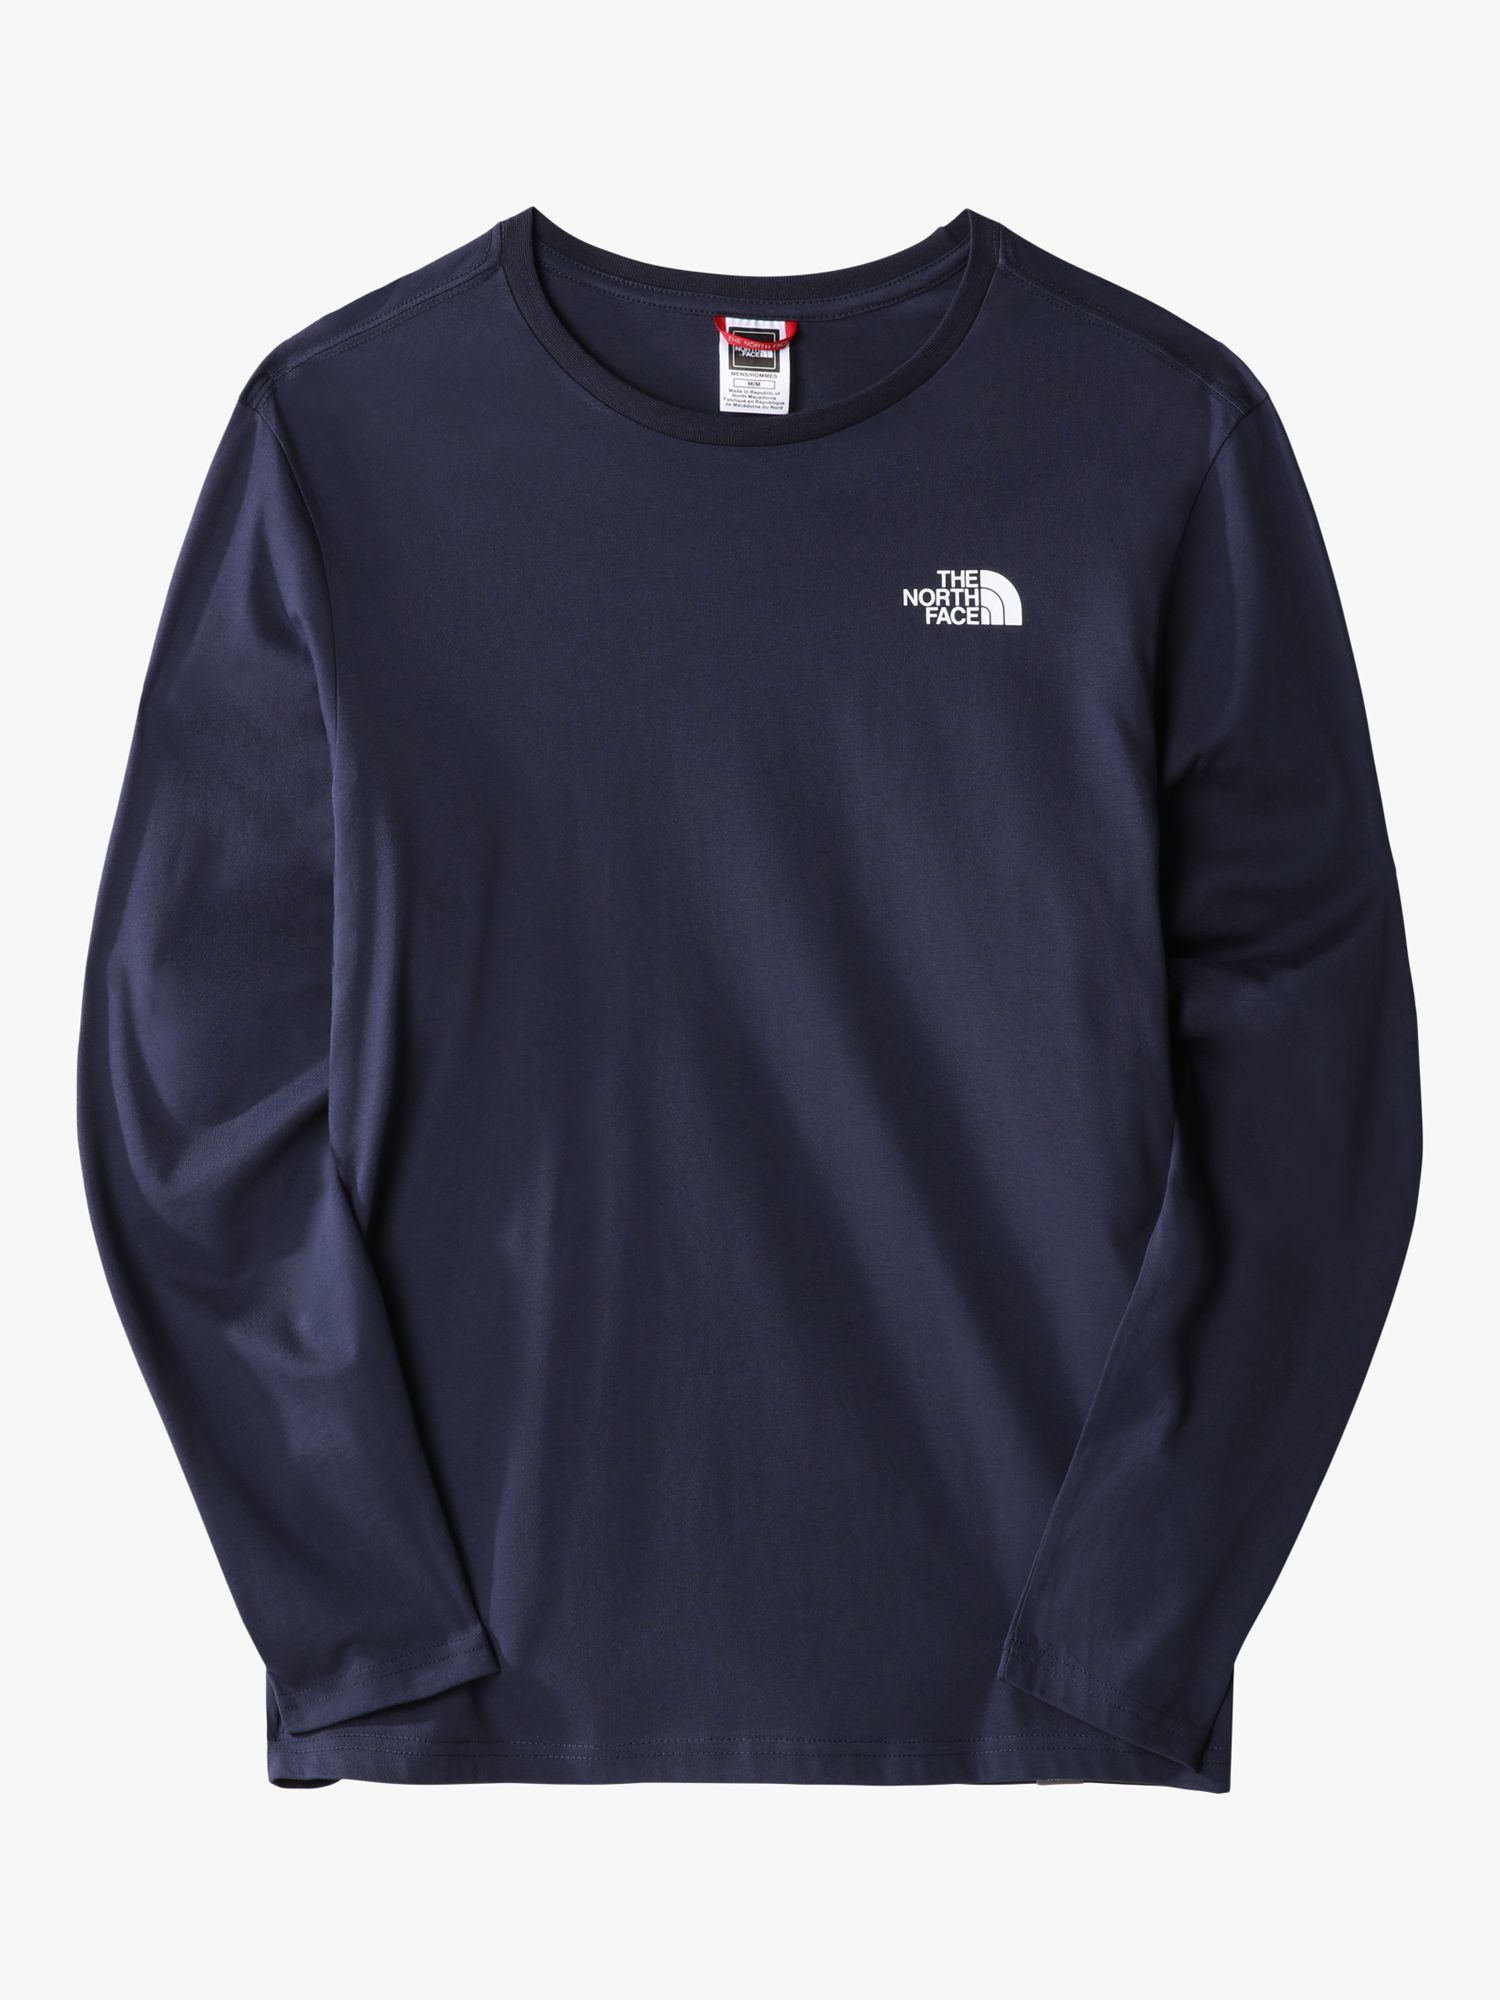 The North Face Easy & John Long Lewis Sleeve Summit Partners T-Shirt, Navy at